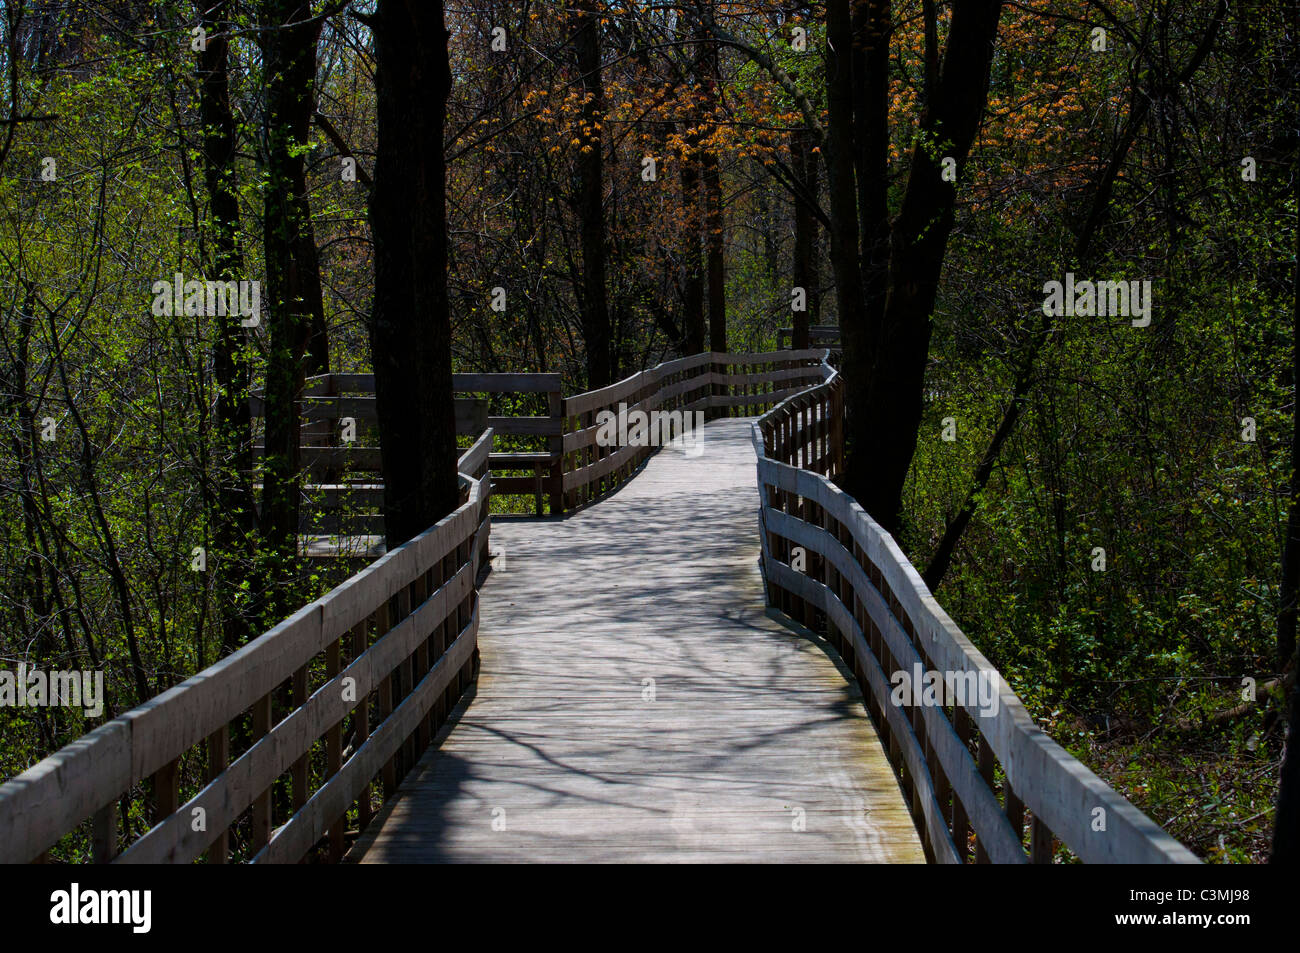 An elevated walkway at the Eco-museum in Ste. Anne de Bellevue, Quebec, Canada. Stock Photo